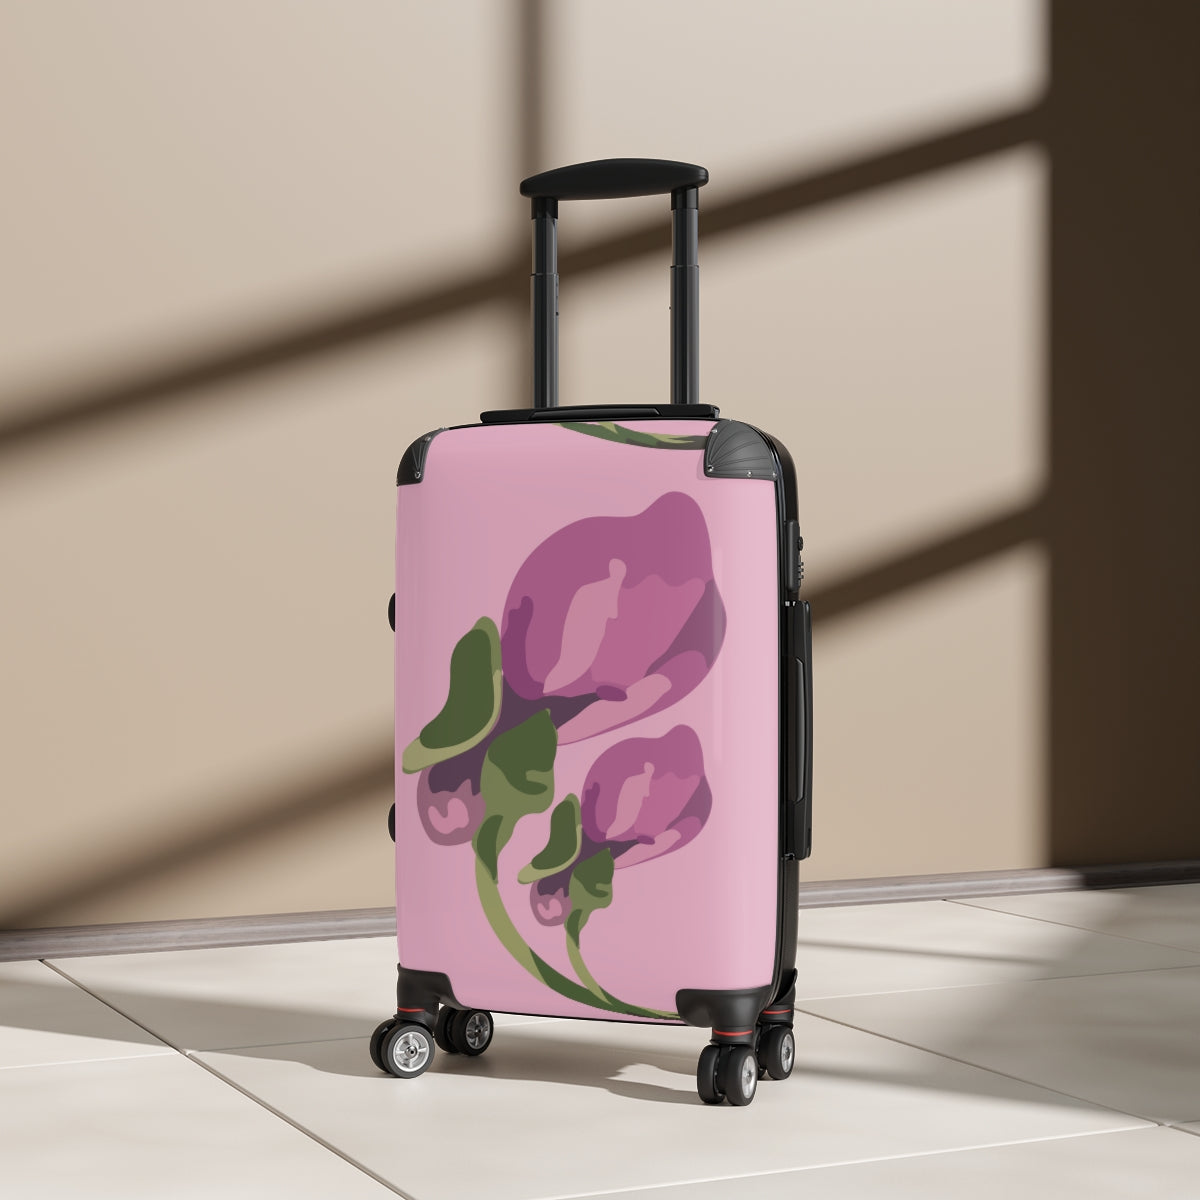 PINK FLORAL SUITCASE SET Artzira, Cabin Suitcase Carry-On Luggage, Trolly Travel Bags Double Wheeled Spinners, Women's Choice